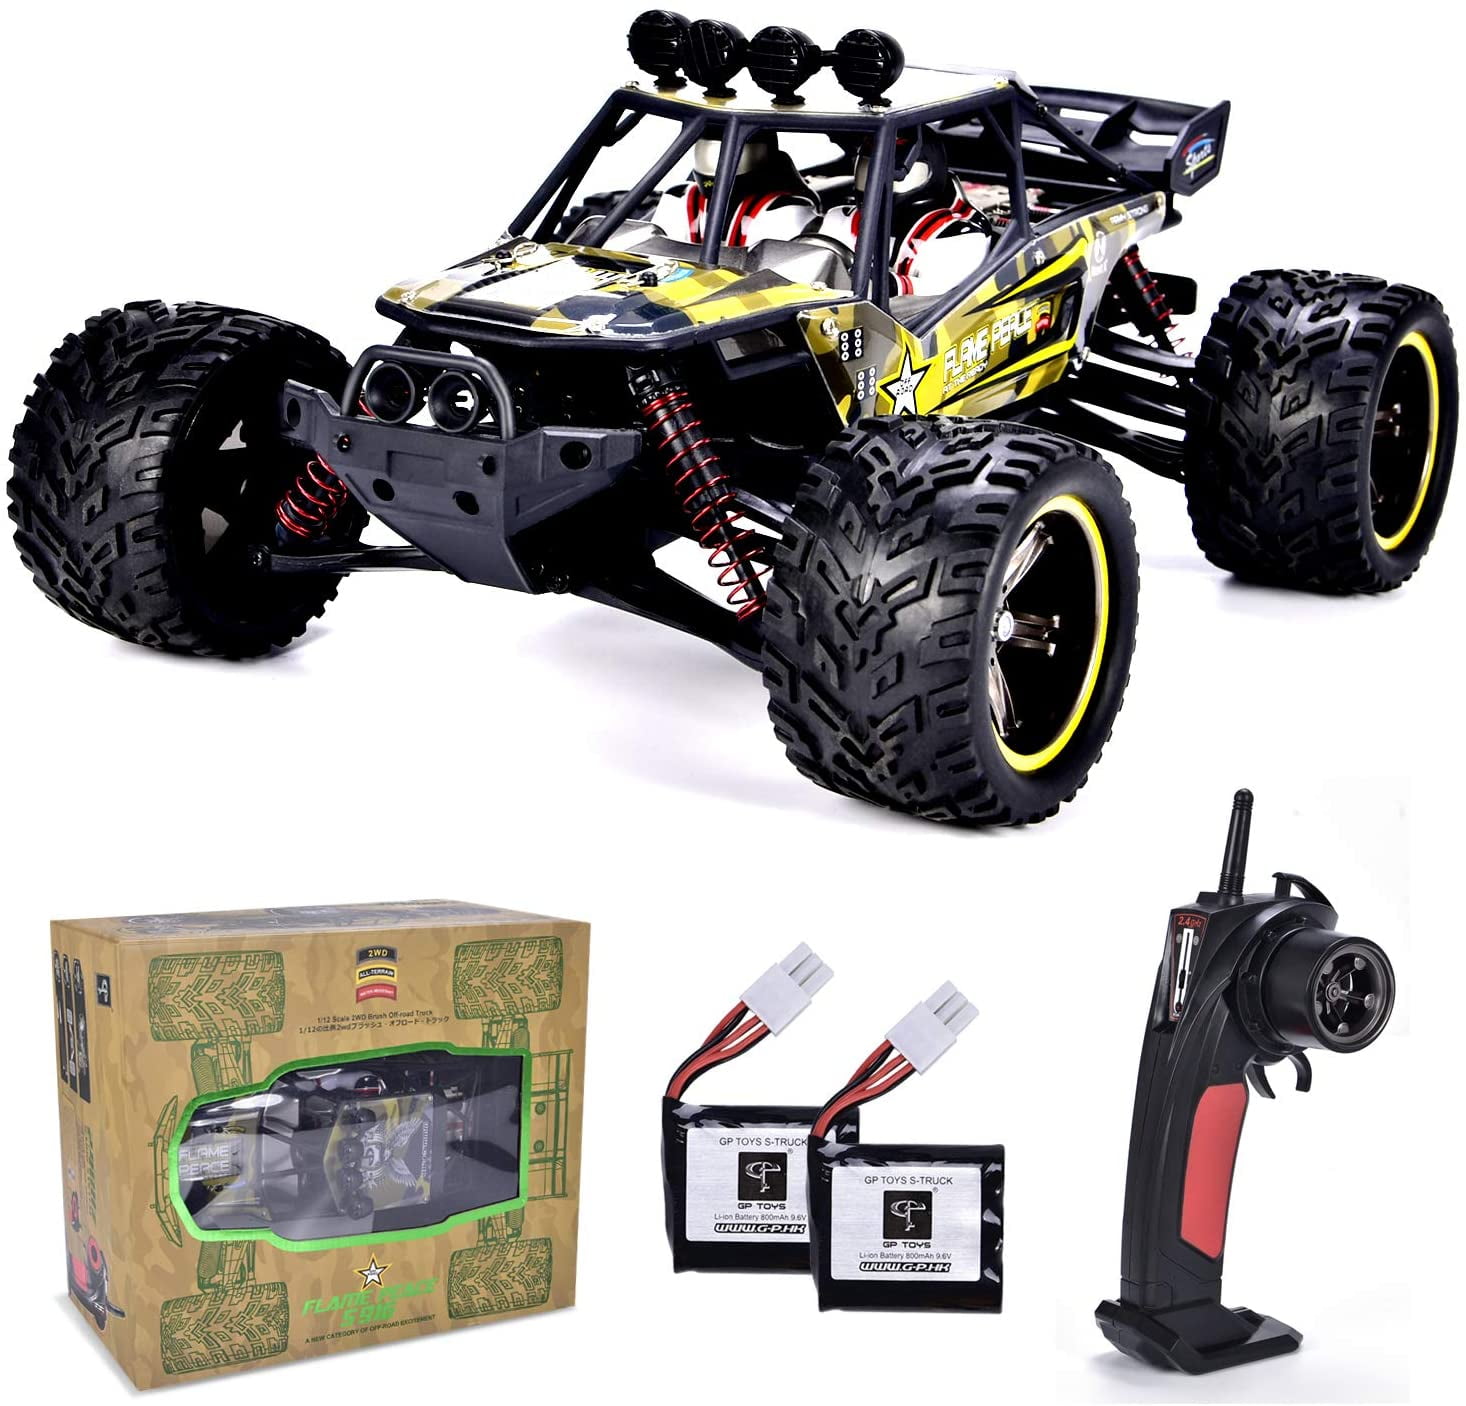 GP TOYS 1:12 Scale Remote Control Car Hobbyist Grade, 4WD High Speed 42km/h  RC Monster Truck, All Terrain Electric Toy off Road Crawler with 2 